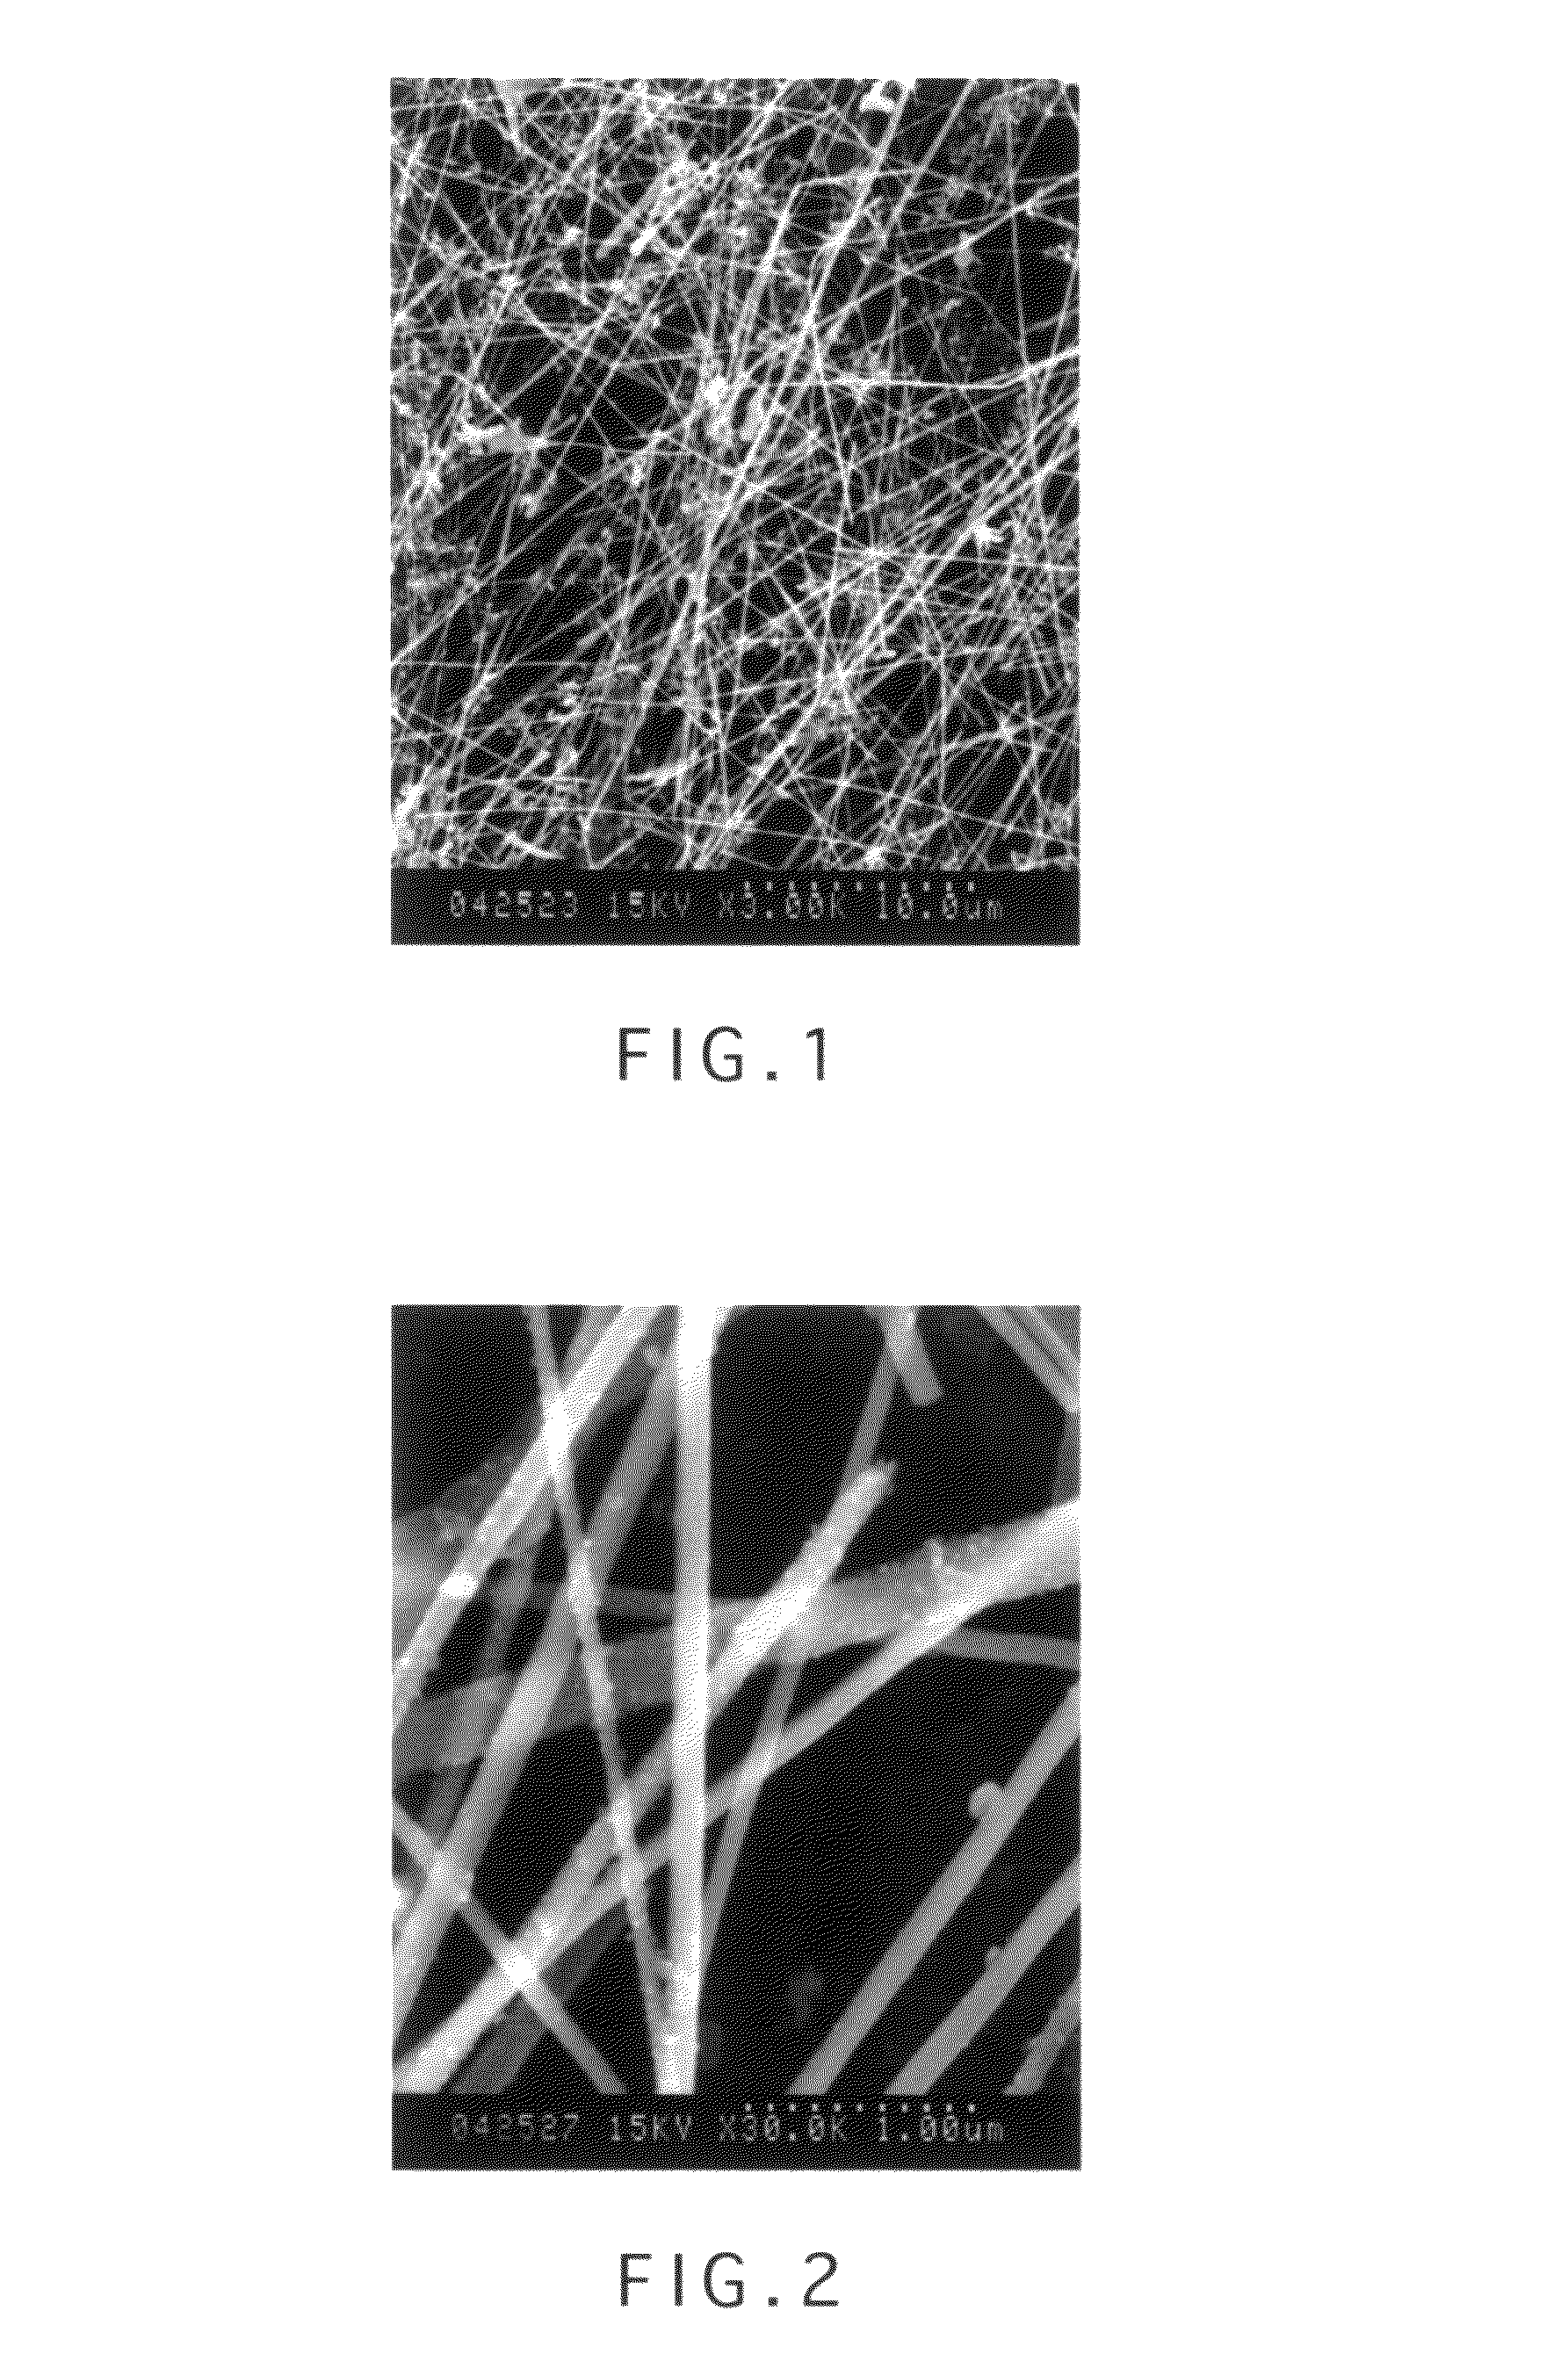 Indium-based nanowire product, oxide nanowire product, and electroconductive oxide nanowire product, as well as production methods thereof